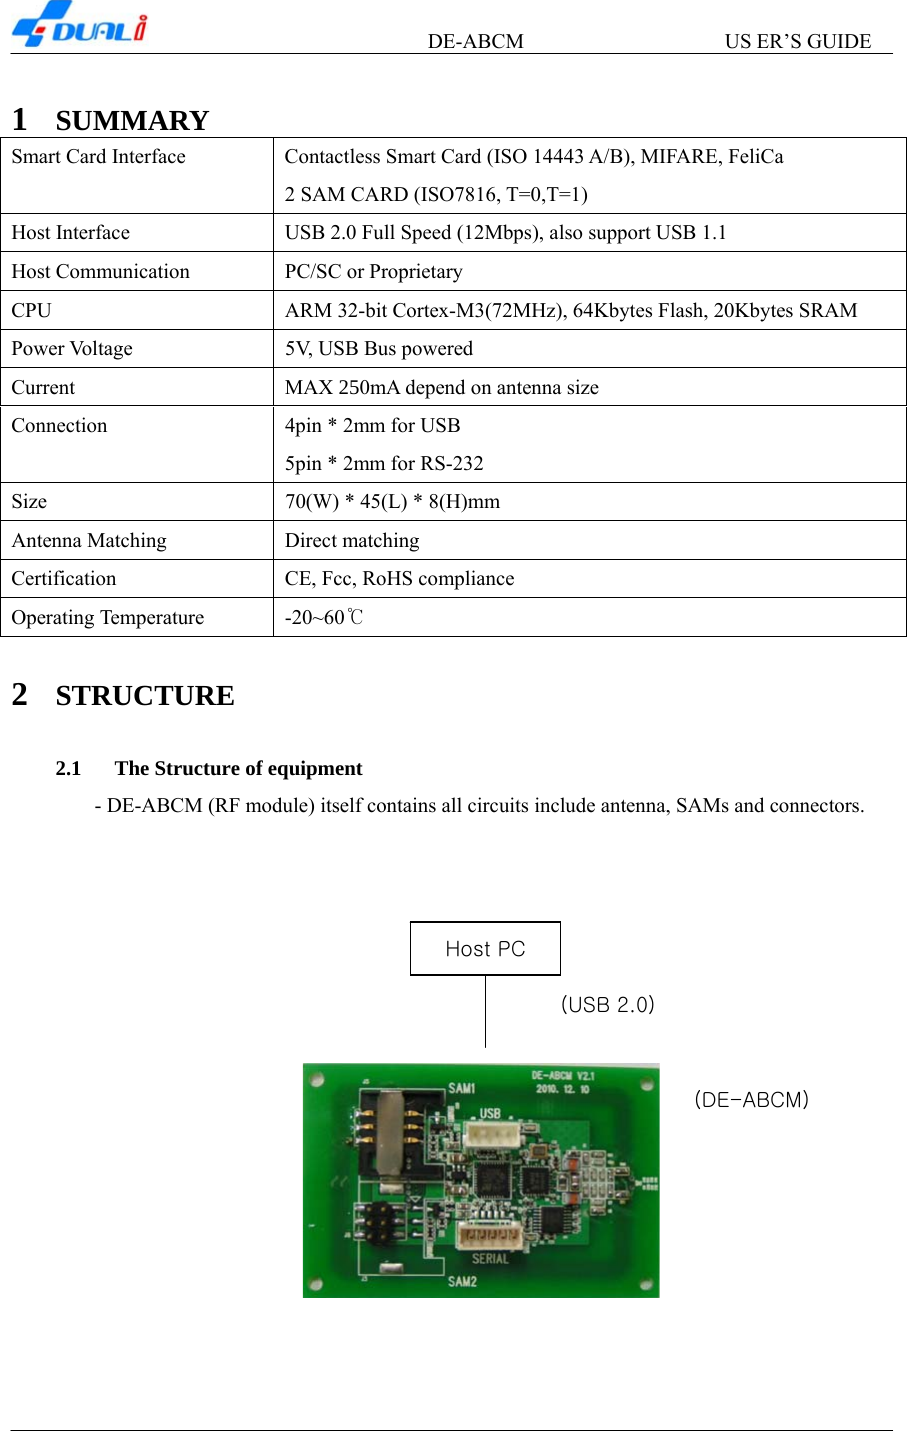       DE-ABCM          US ER’S GUIDE   1 SUMMARY Smart Card Interface  Contactless Smart Card (ISO 14443 A/B), MIFARE, FeliCa 2 SAM CARD (ISO7816, T=0,T=1) Host Interface  USB 2.0 Full Speed (12Mbps), also support USB 1.1 Host Communication  PC/SC or Proprietary CPU  ARM 32-bit Cortex-M3(72MHz), 64Kbytes Flash, 20Kbytes SRAM Power Voltage  5V, USB Bus powered Current  MAX 250mA depend on antenna size Connection    4pin * 2mm for USB 5pin * 2mm for RS-232 Size  70(W) * 45(L) * 8(H)mm Antenna Matching  Direct matching Certification  CE, Fcc, RoHS compliance Operating Temperature  -20~60℃  2 STRUCTURE  2.1 The Structure of equipment - DE-ABCM (RF module) itself contains all circuits include antenna, SAMs and connectors.      (USB 2.0)Host PC     (DE-ABCM)      